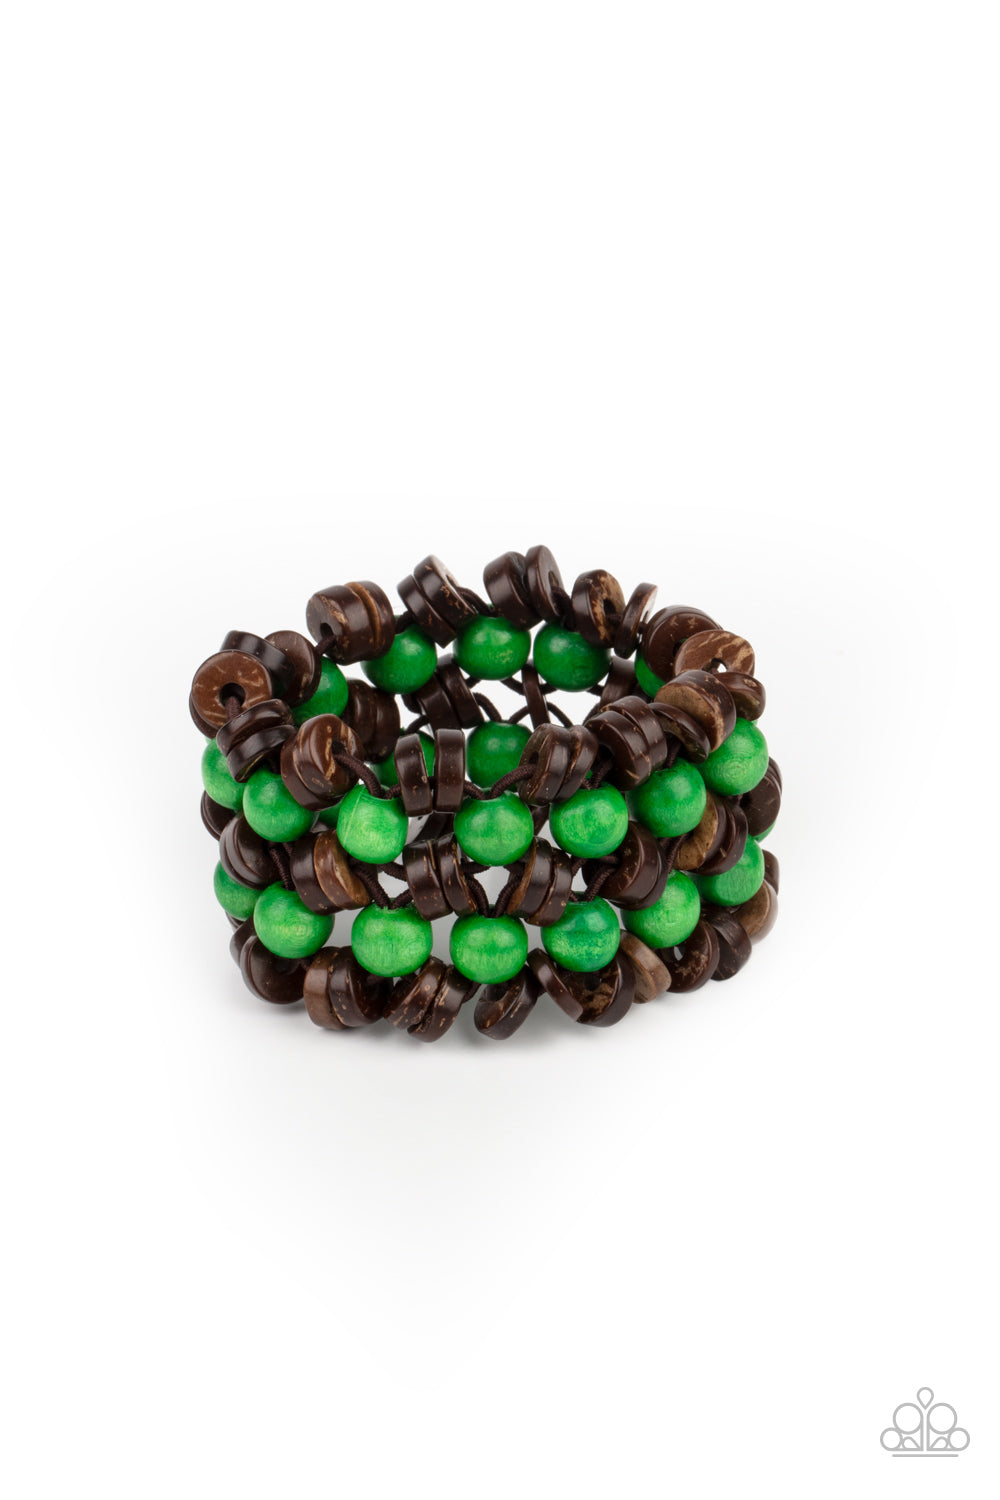 Rows of green wooden beads and brown wooden discs are threaded along stretchy bands that decoratively weave around the wrist, creating a tropical inspired statement piece.